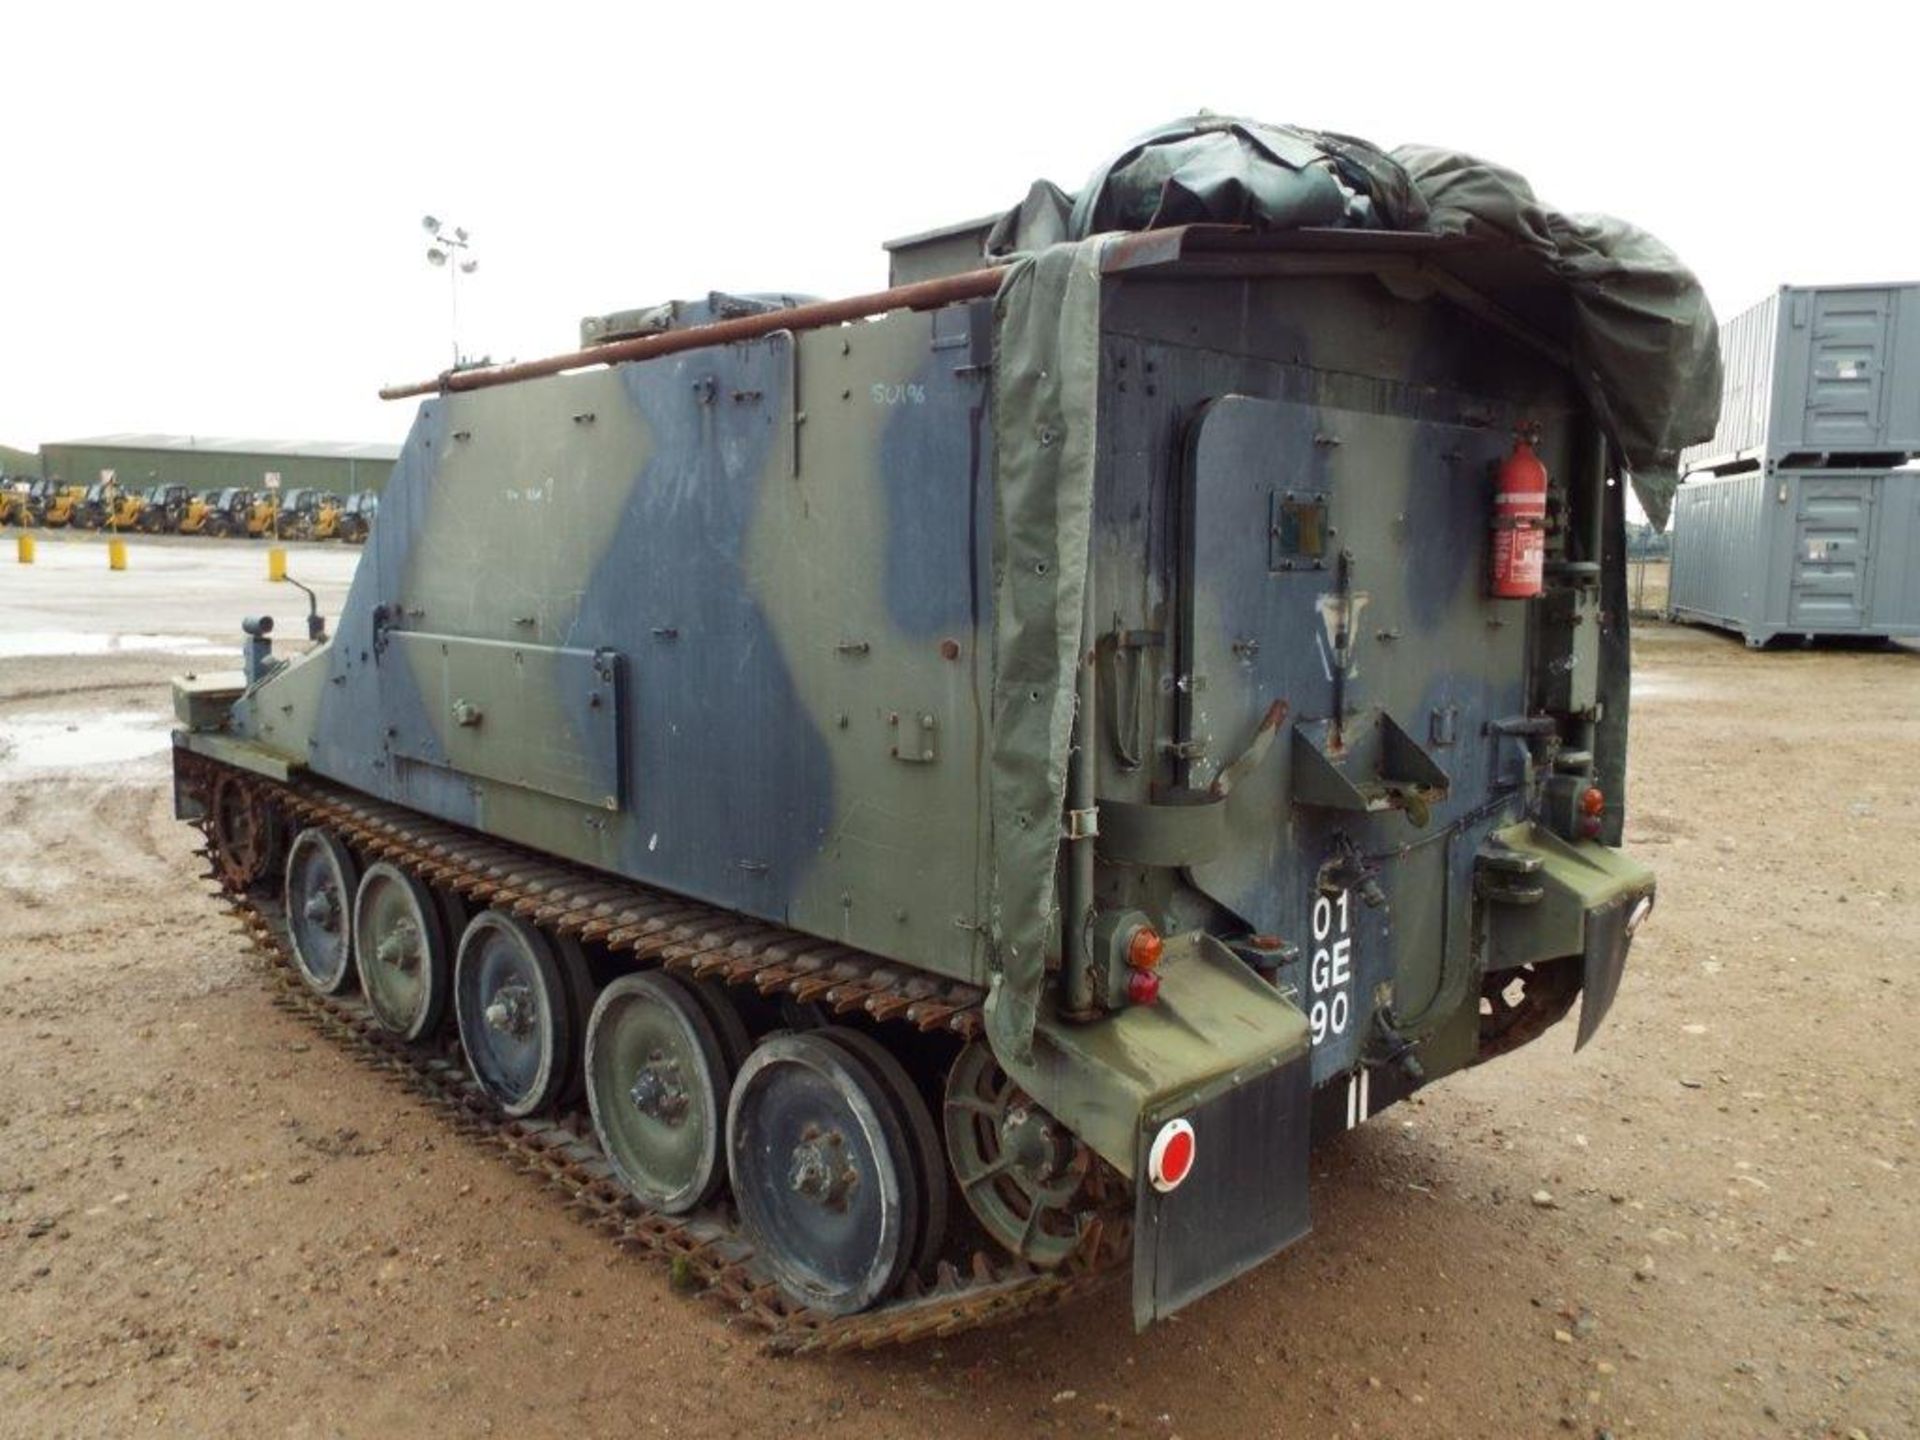 CVRT (Combat Vehicle Reconnaissance Tracked) FV105 Sultan Armoured Personnel Carrier - Image 5 of 27